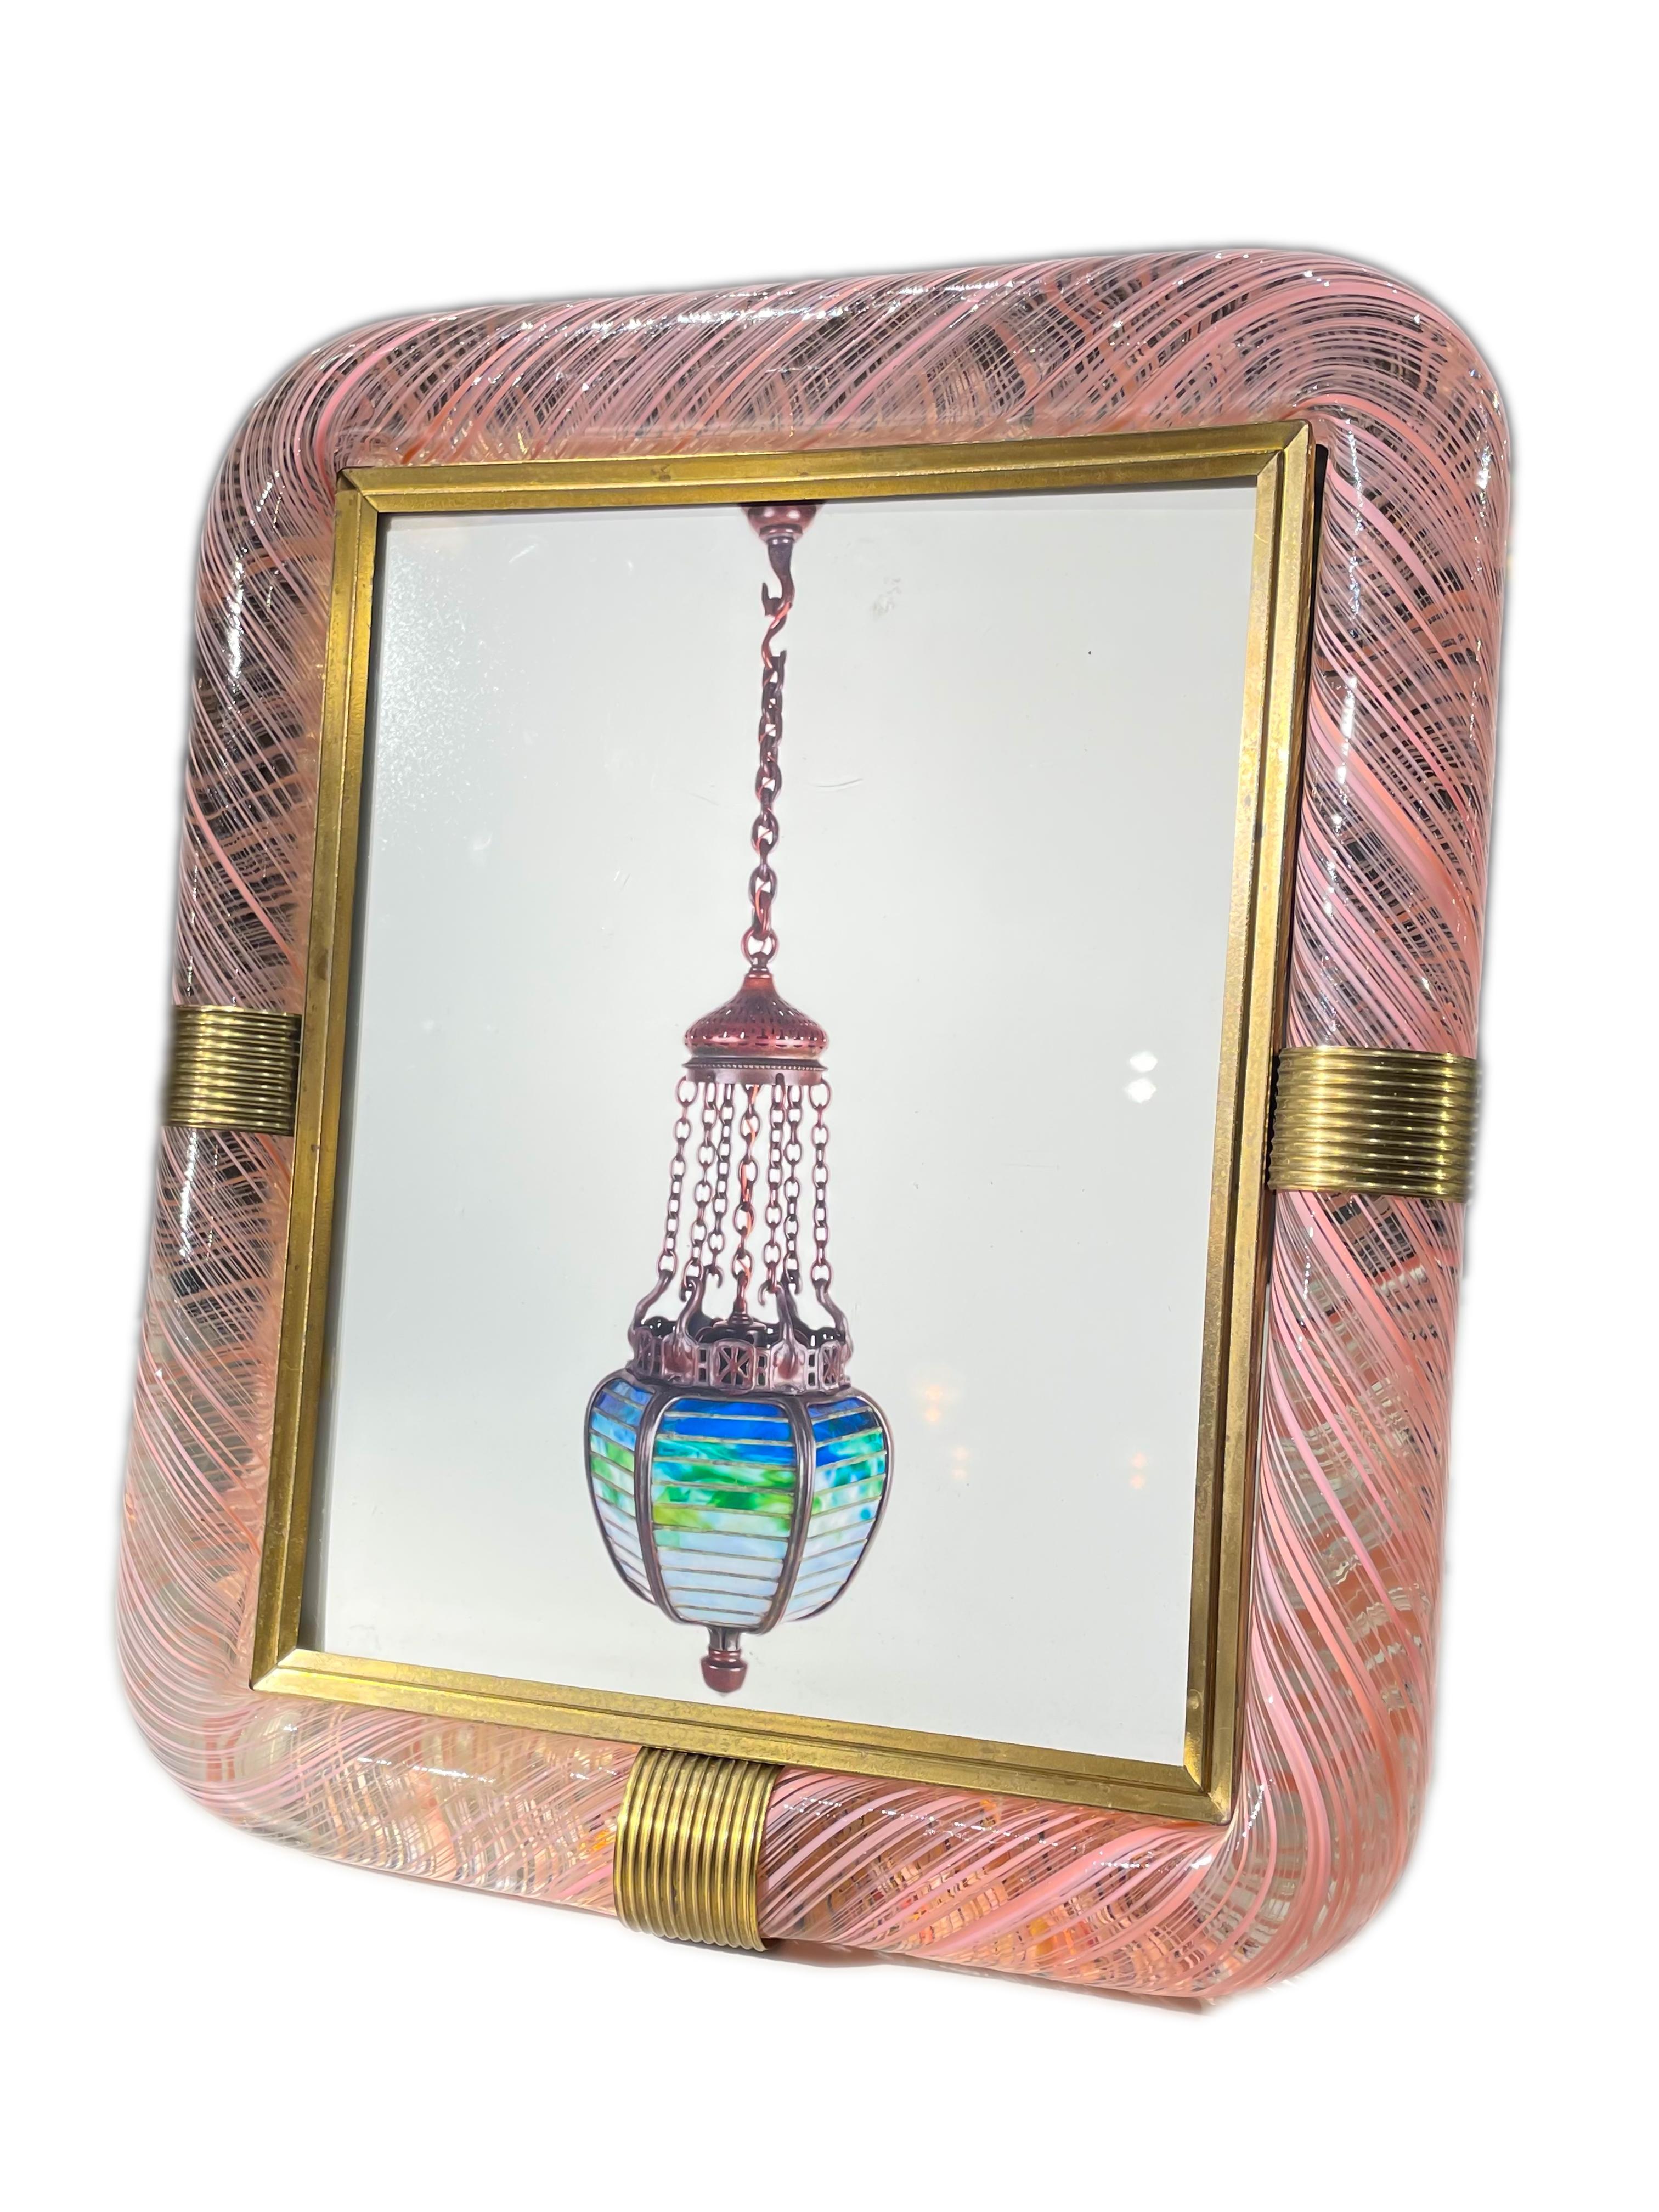 Hand-Crafted Mid 20th Century Italian Art Glass Picture Frame for Venini by, Carlo Scarpa For Sale